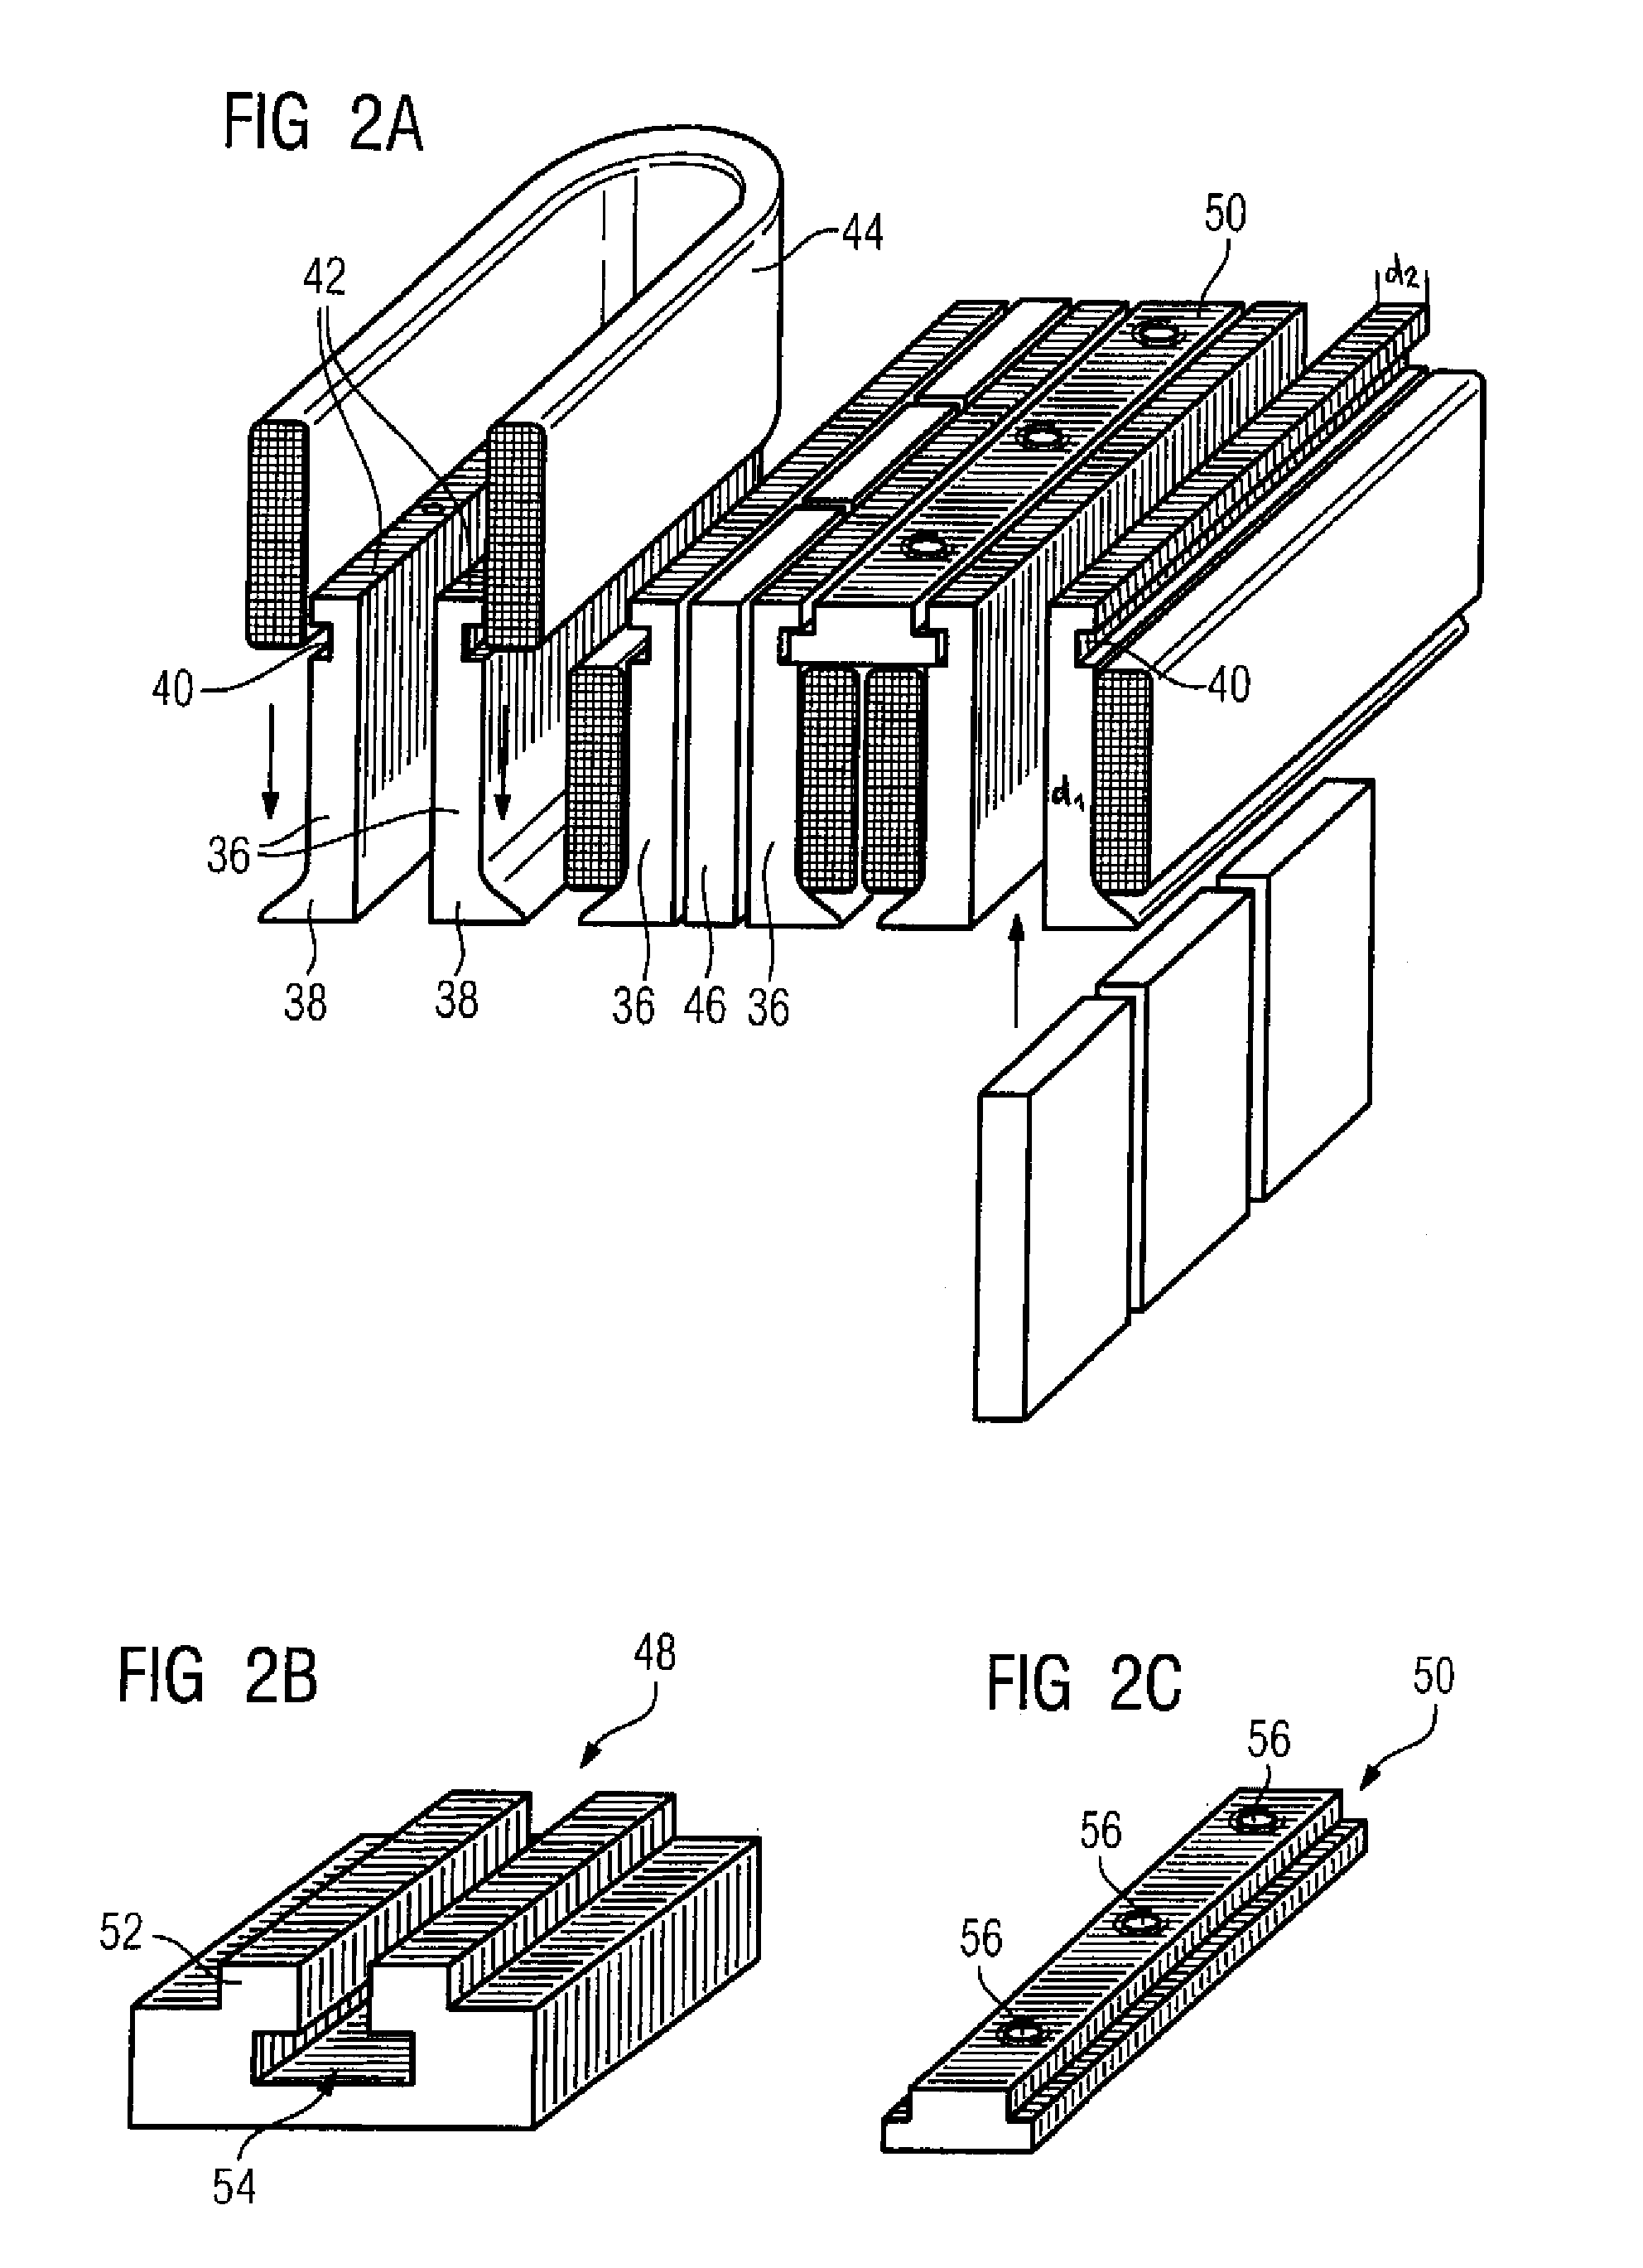 Method for providing tooth halves with removable tooth tips for an electrical machine